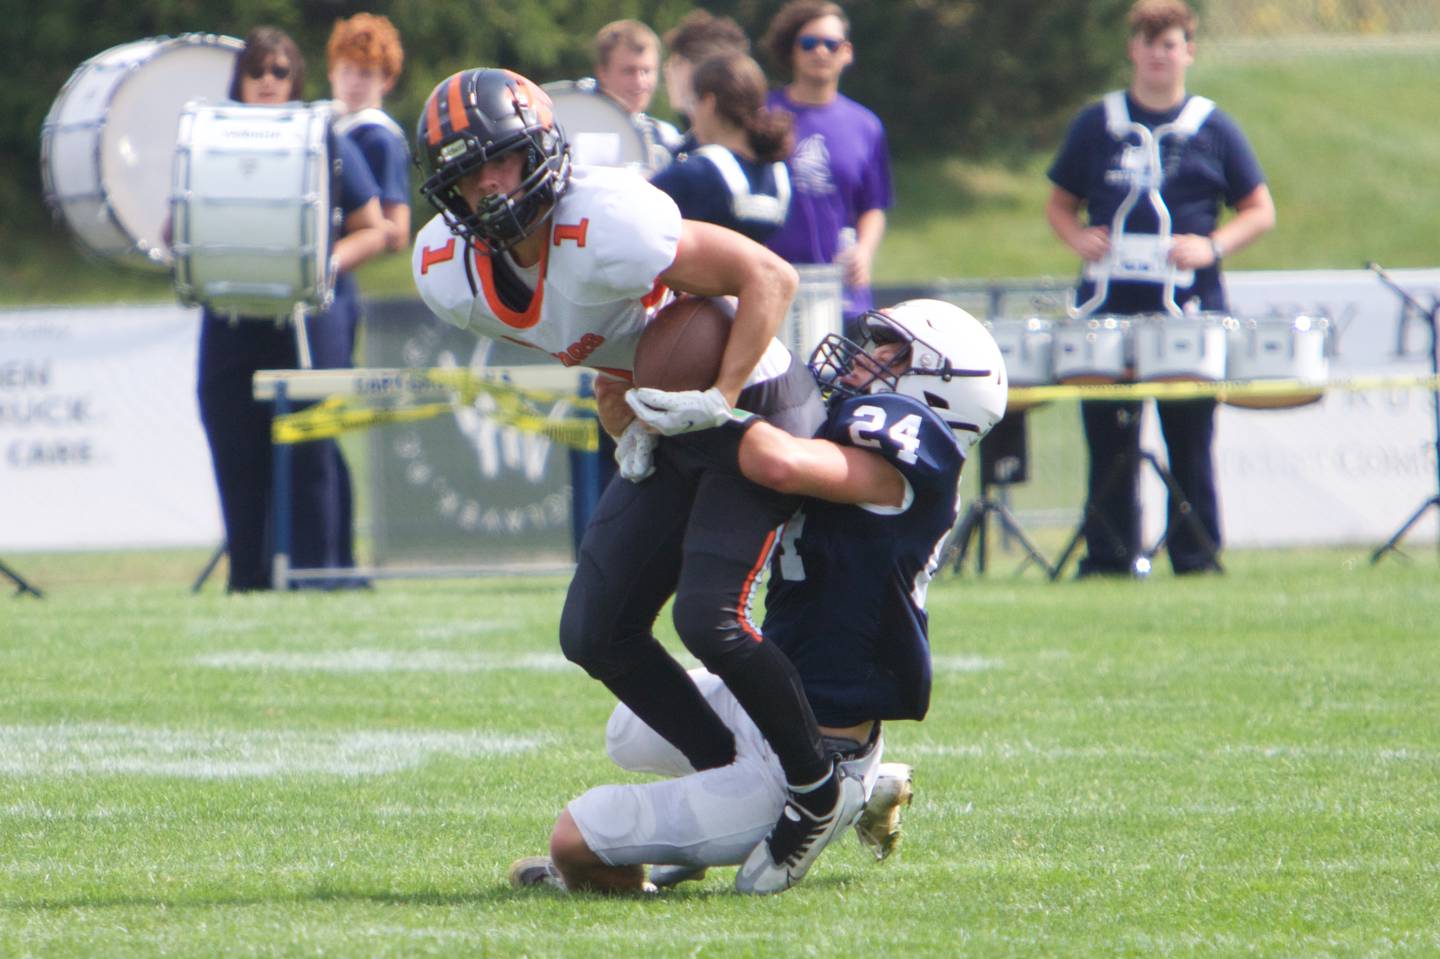 McHenry's Jacob Zarek is tackled by Cary-Grove's Josh Domagala on Saturday, Sept. 17,2022 in Cary.